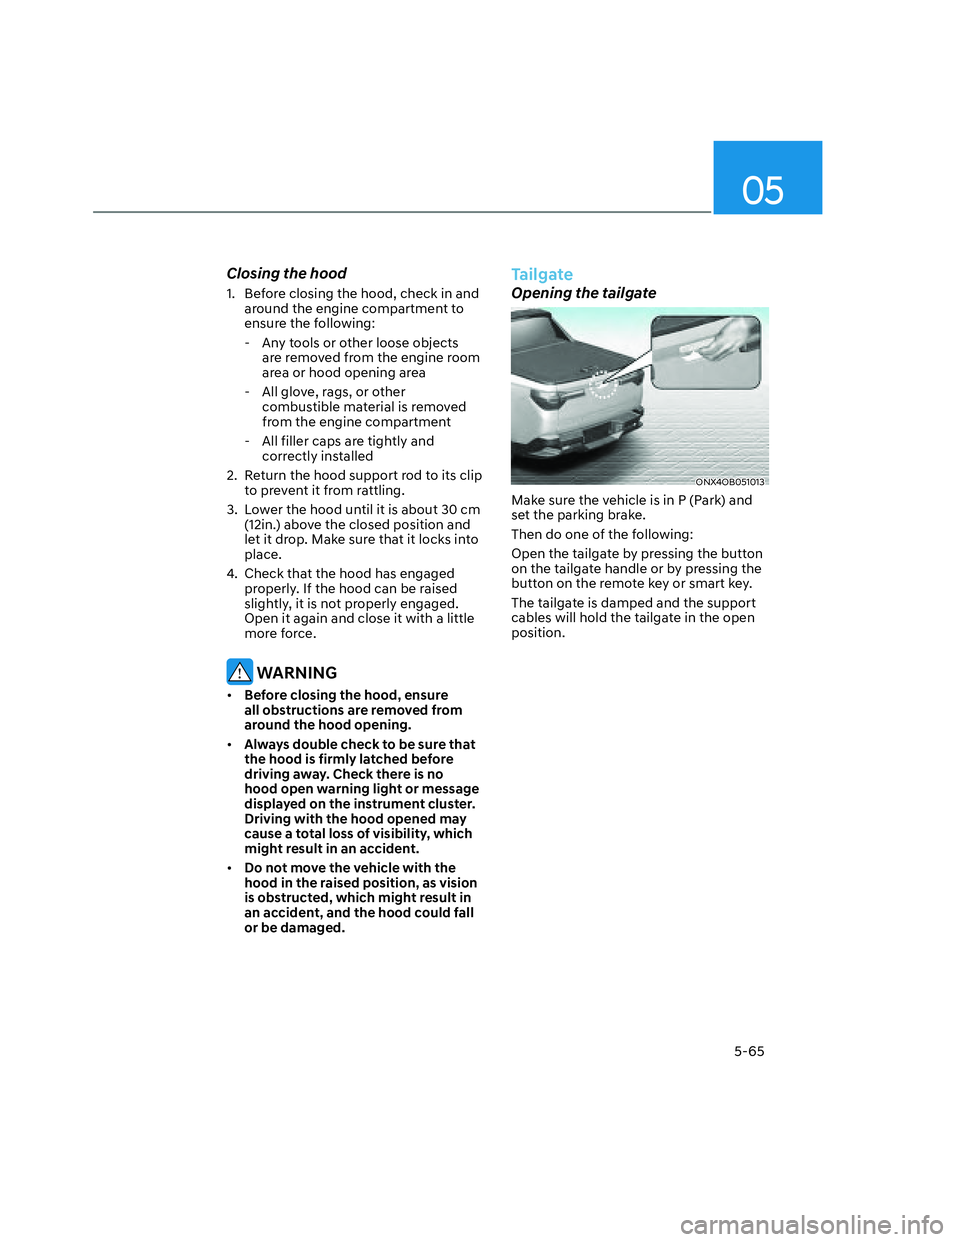 HYUNDAI SANTA CRUZ 2022  Owners Manual 05
5-65
Closing the hood
1.  Before closing the hood, check in and 
around the engine compartment to 
ensure the following:
  - Any tools or other loose objects 
are removed from the engine room 
area